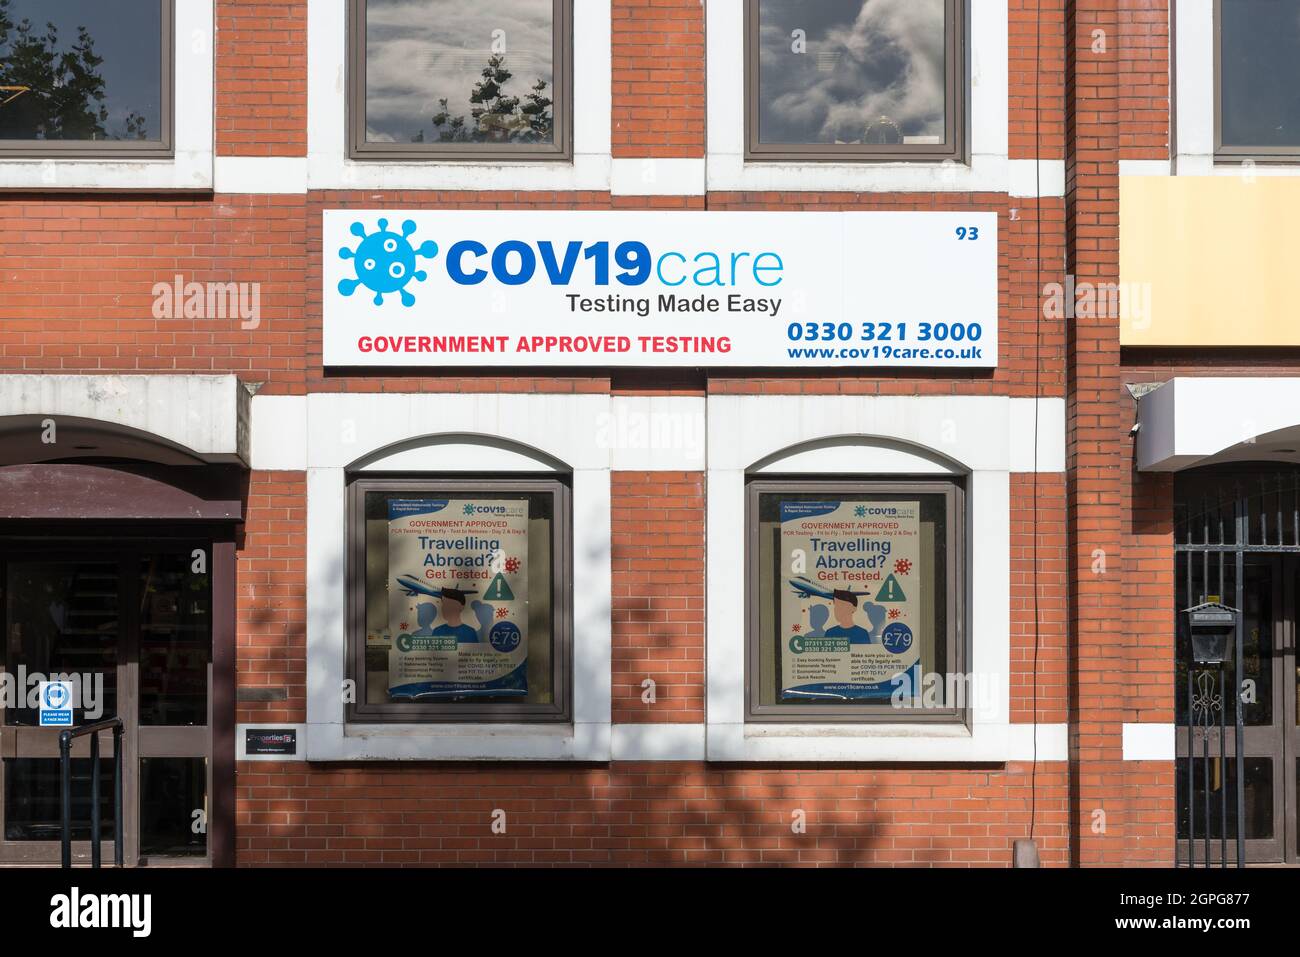 Cov19 Care private company offering government approved covid 19 testing in Birmingham Stock Photo